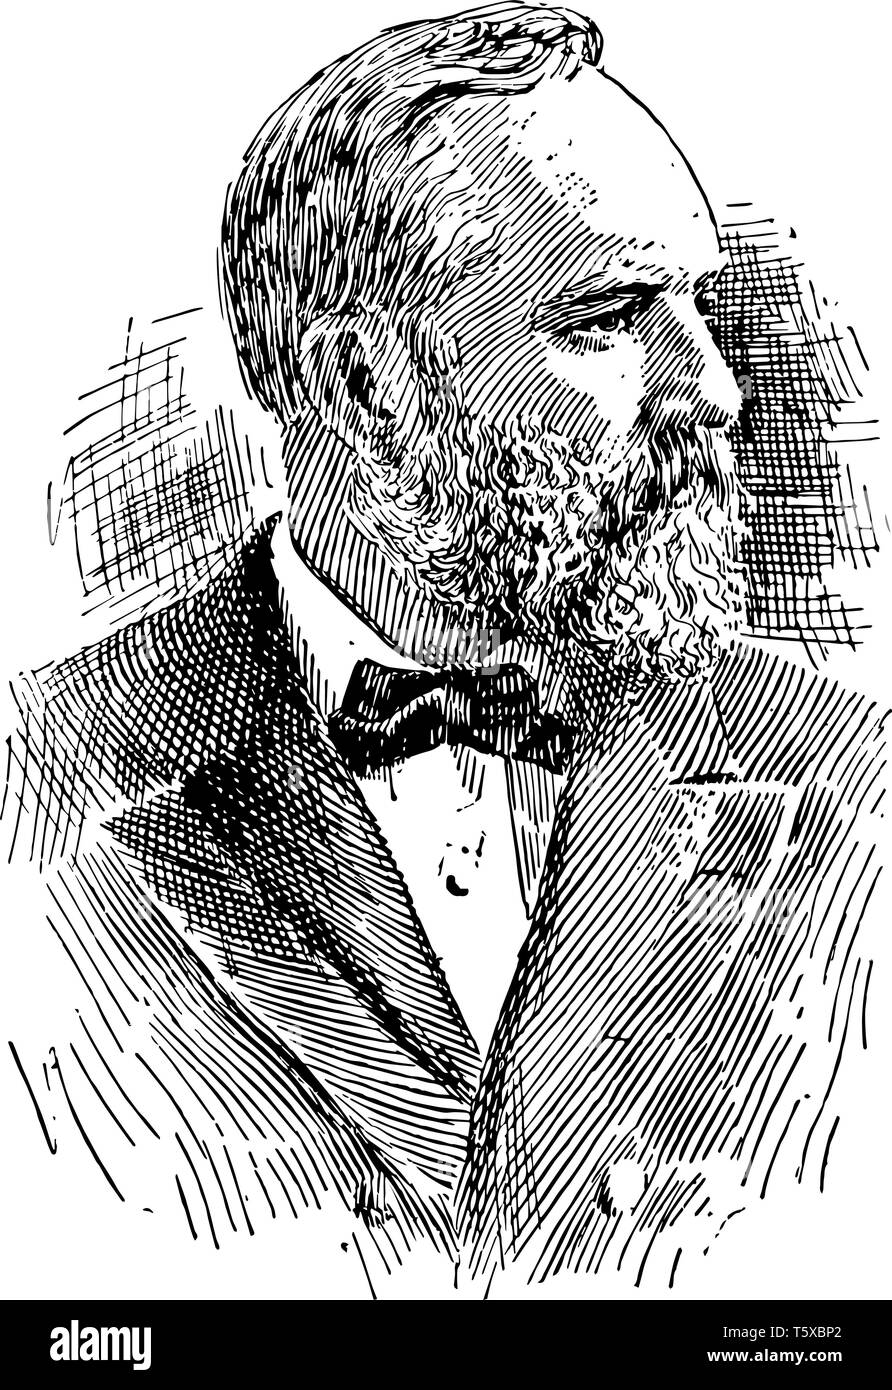 James Abram Garfield 1831 to 1881 he was the 20th president of the United States and member of the U.S. house of representatives from Ohio vintage lin Stock Vector